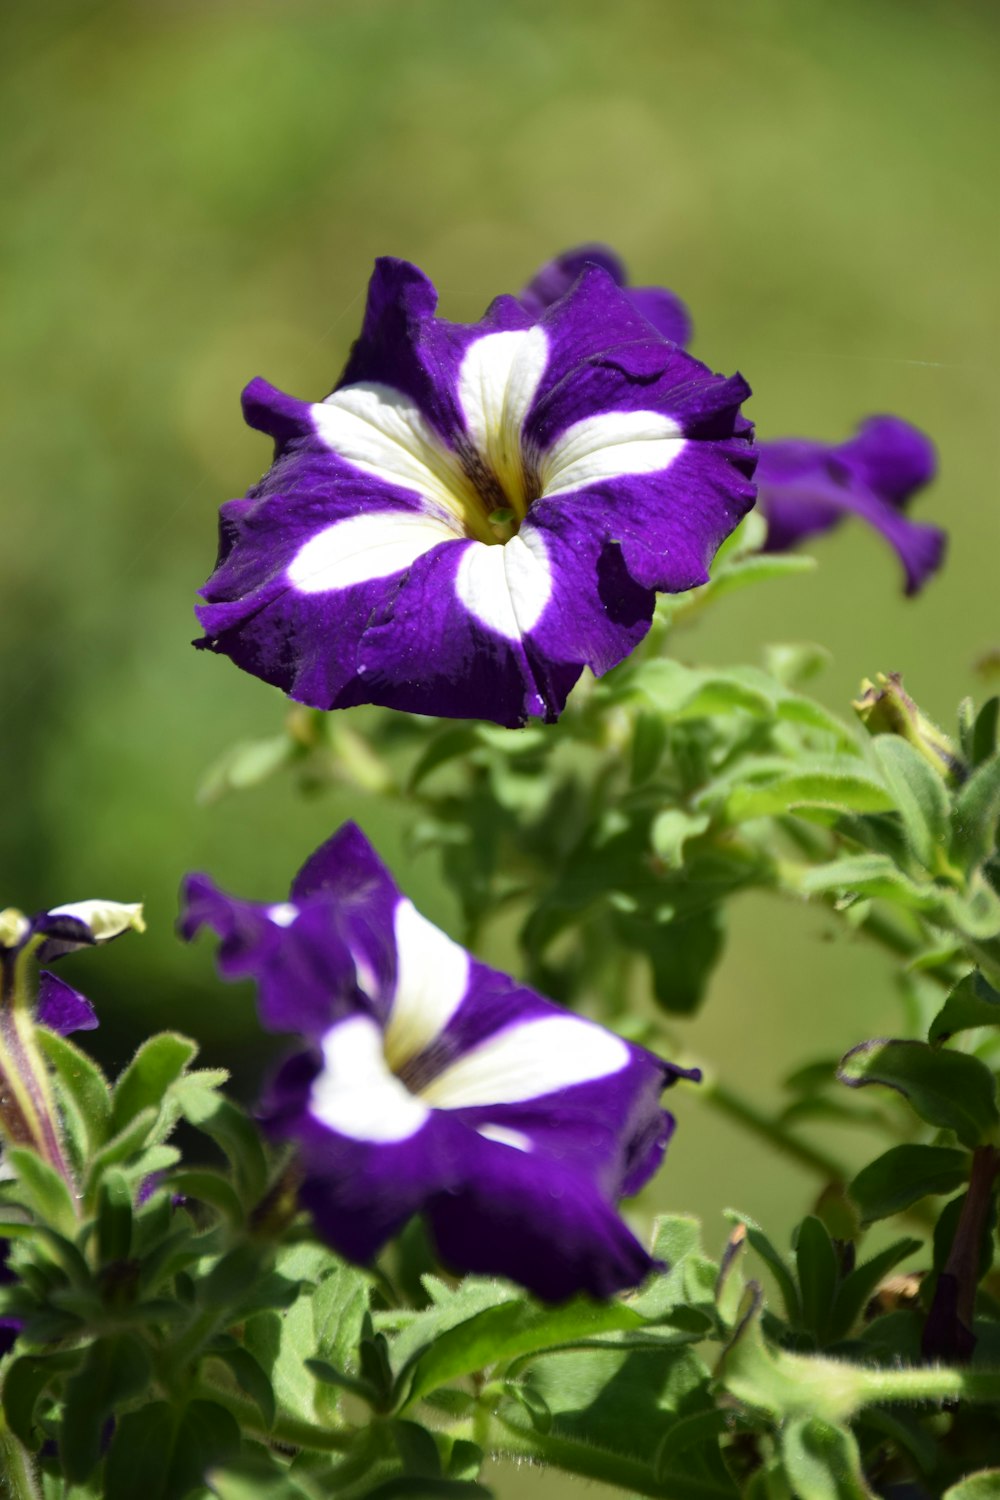 purple and white flowers blooming in a garden